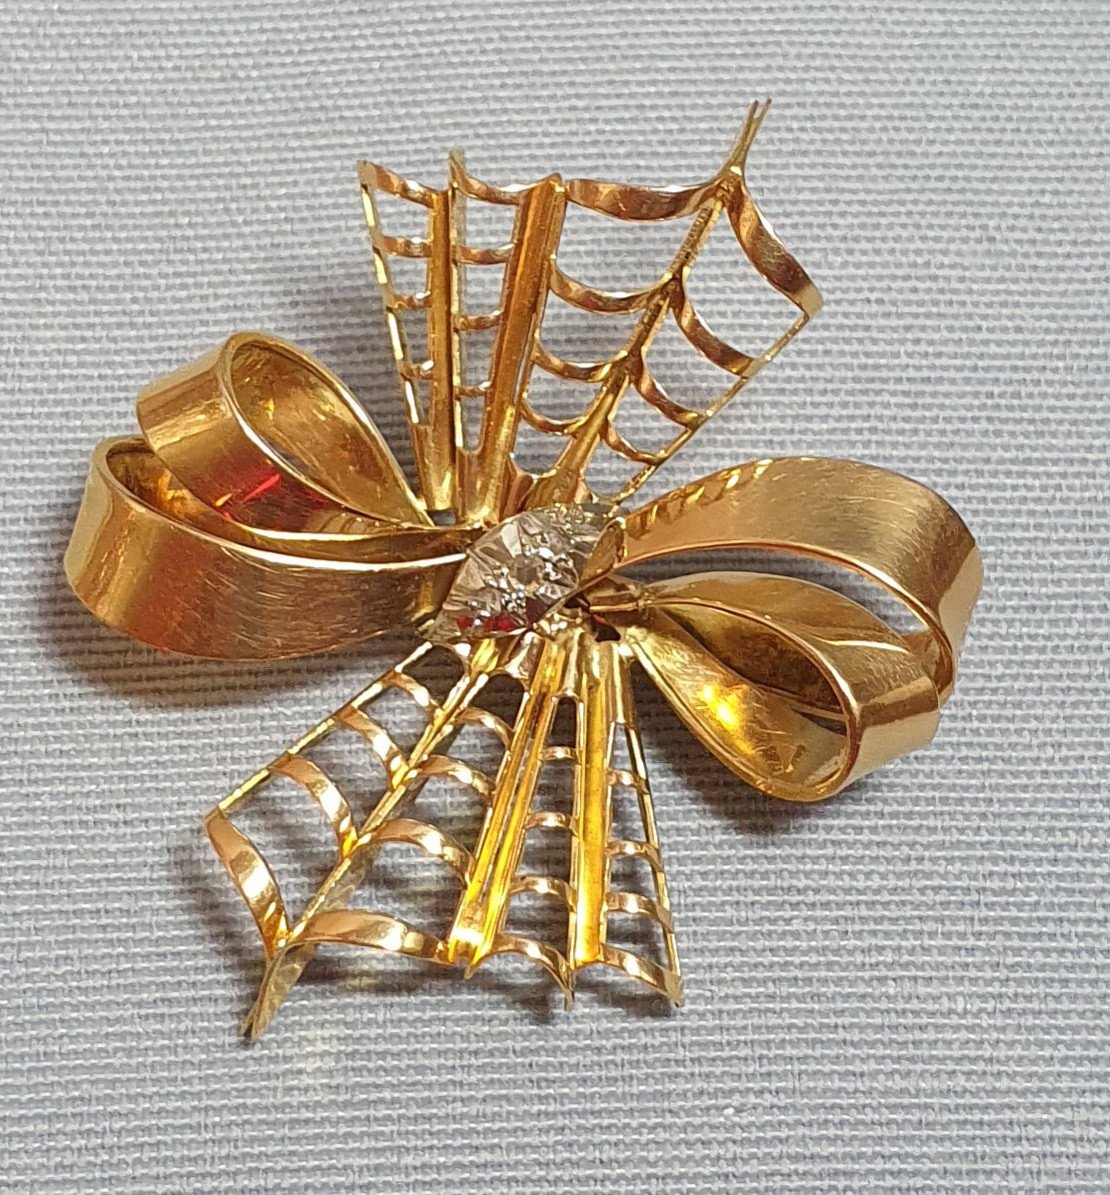 Yellow Gold Brooch In The Shape Of A Knot With Shells And Pans - Circa 1950